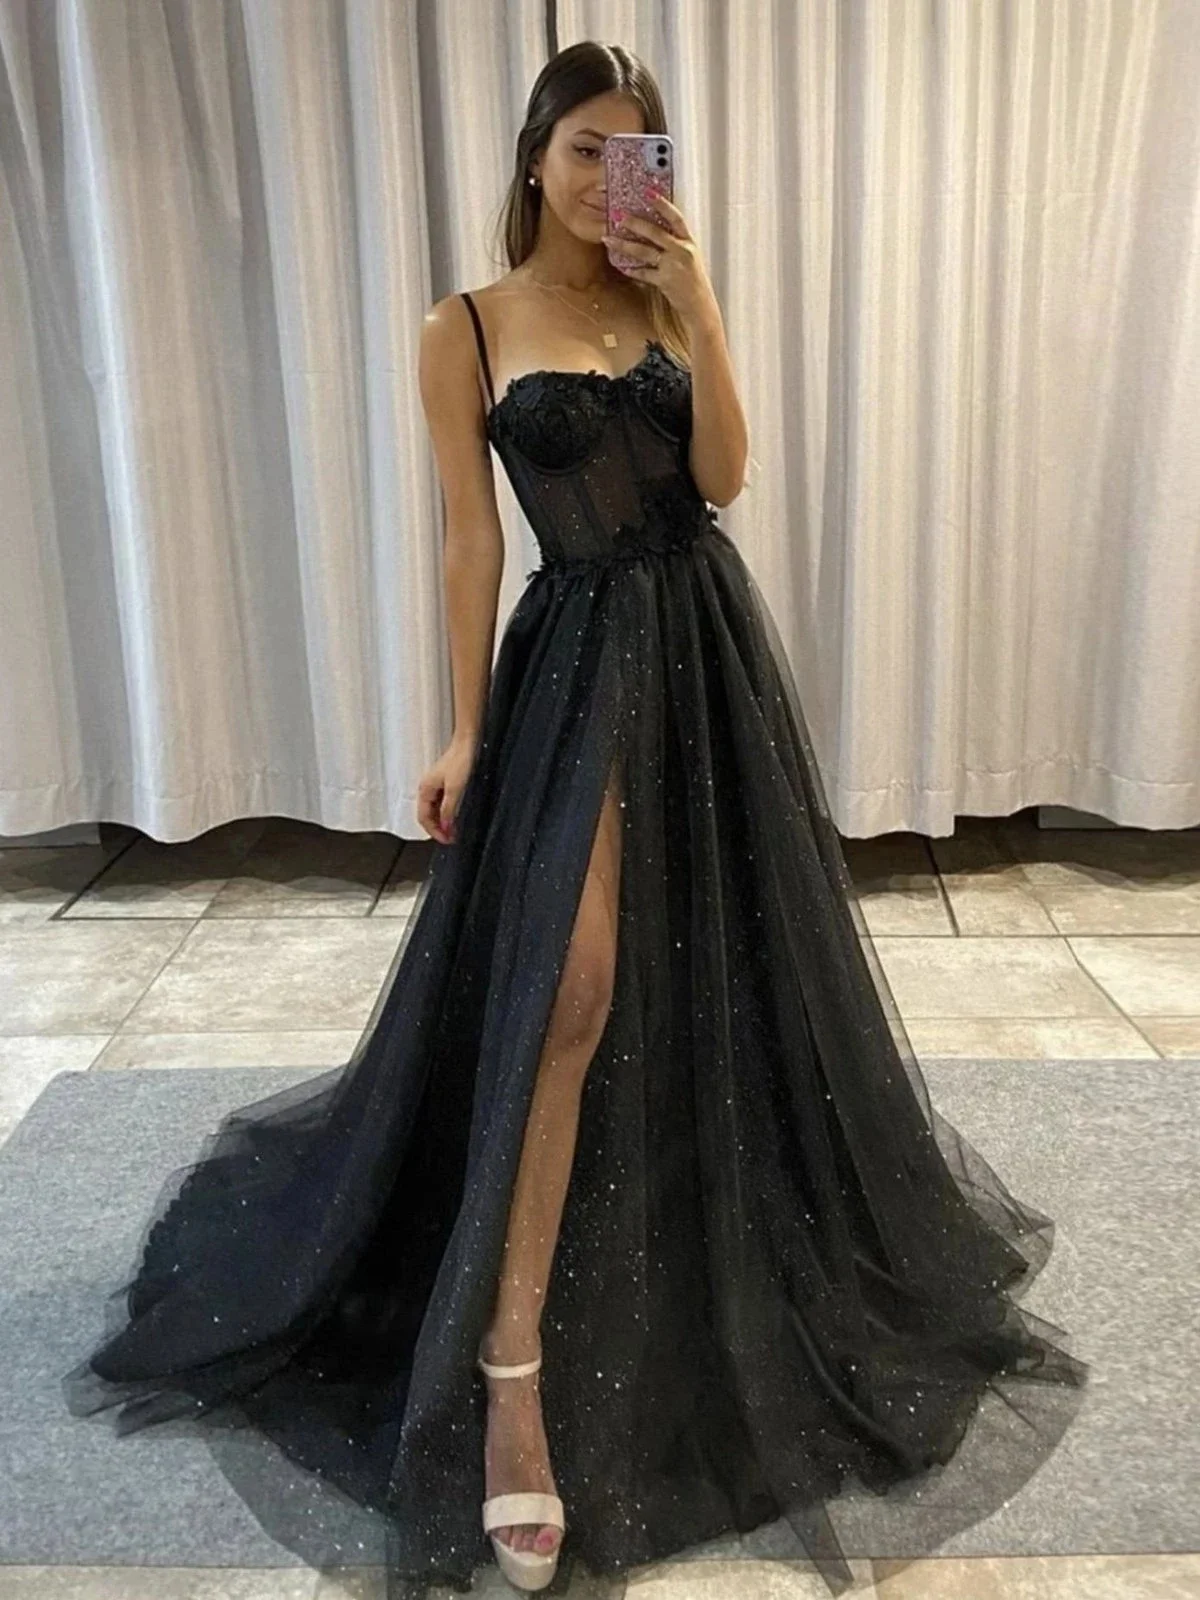 

Shiny Black Glittering Prom Dresses Sweetheart Corset Party Dresses 3D Flowers Spaghetti Straps Long Evening Gowns Side Slit